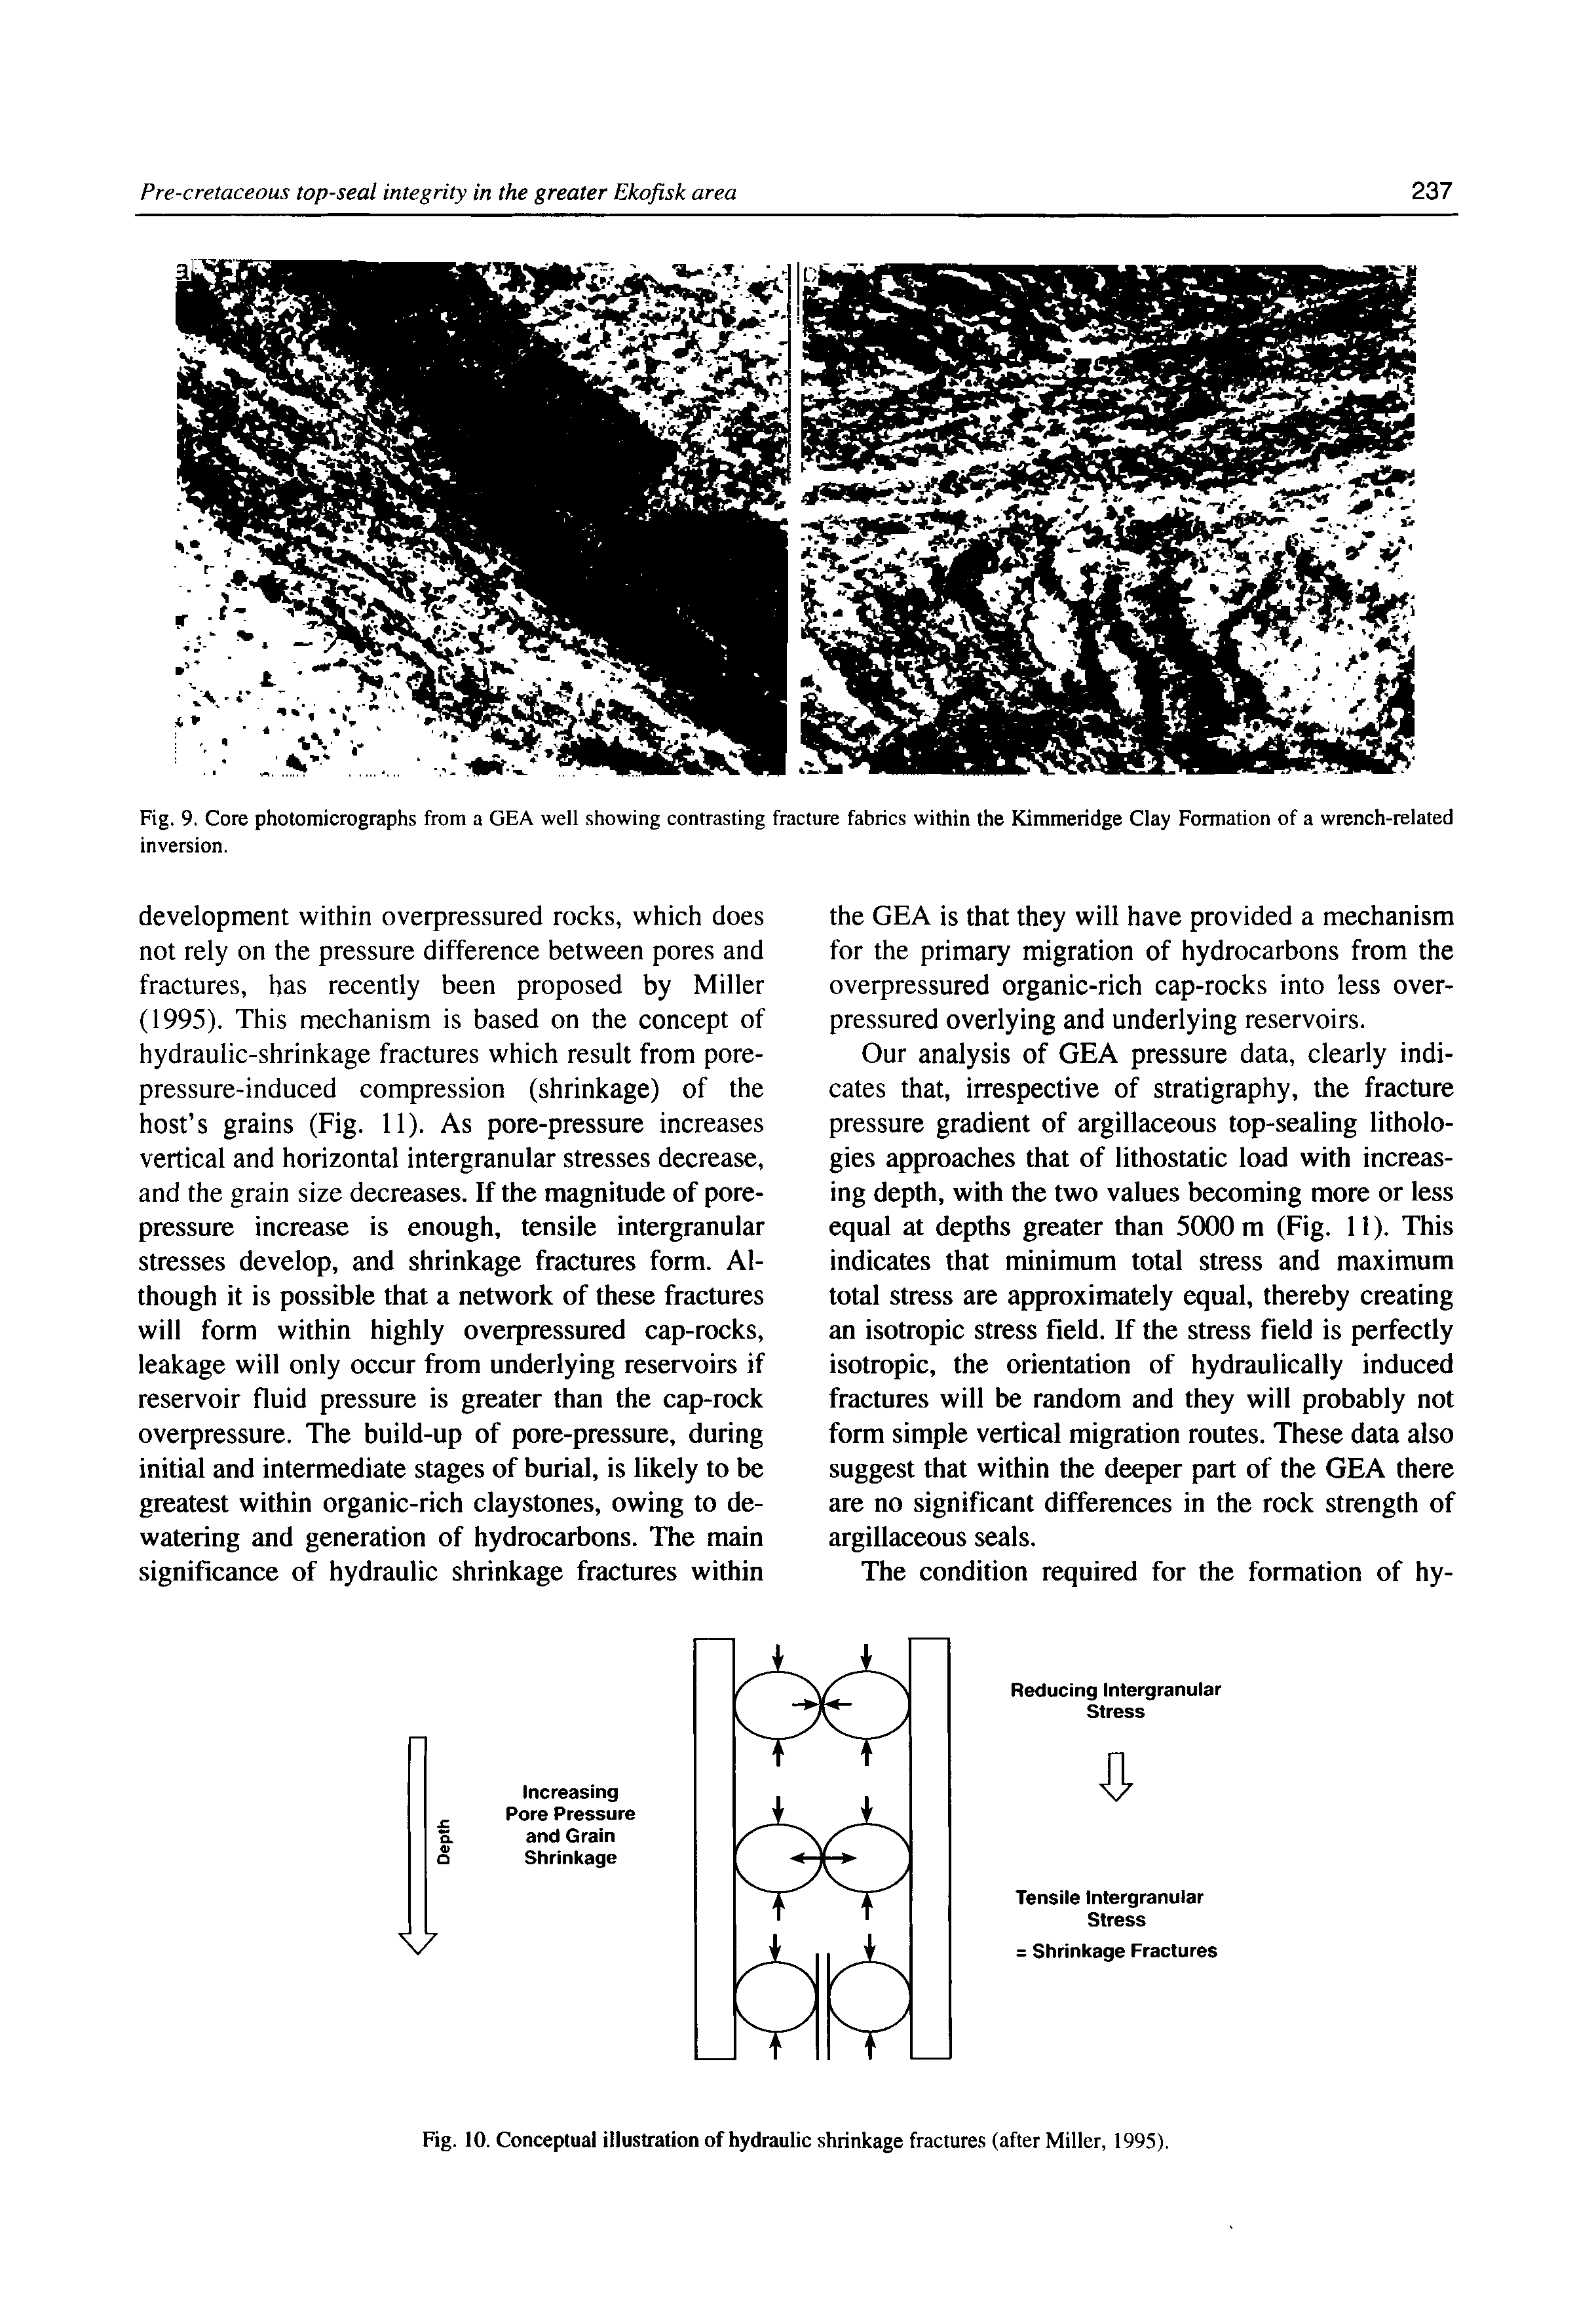 Fig. 9, Core photomicrographs from a GEA well showing contrasting fracture fabrics within the Kimmeridge Clay Formation of a wrench-related inversion.